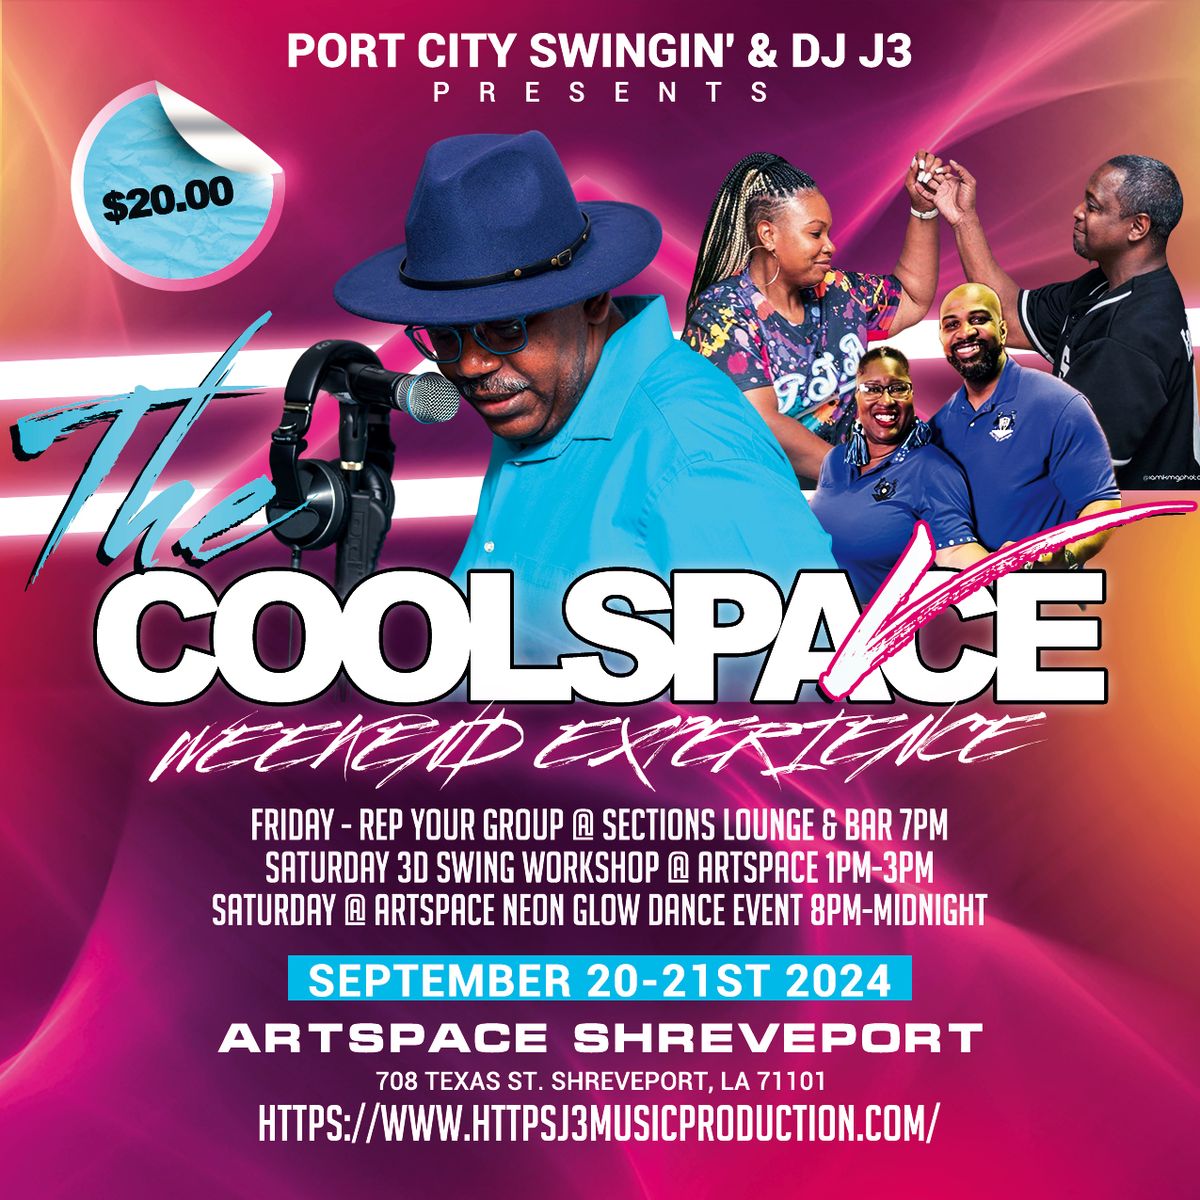 J3 & Port City Swingin' Presents The CoolSpace V Weekend Experience